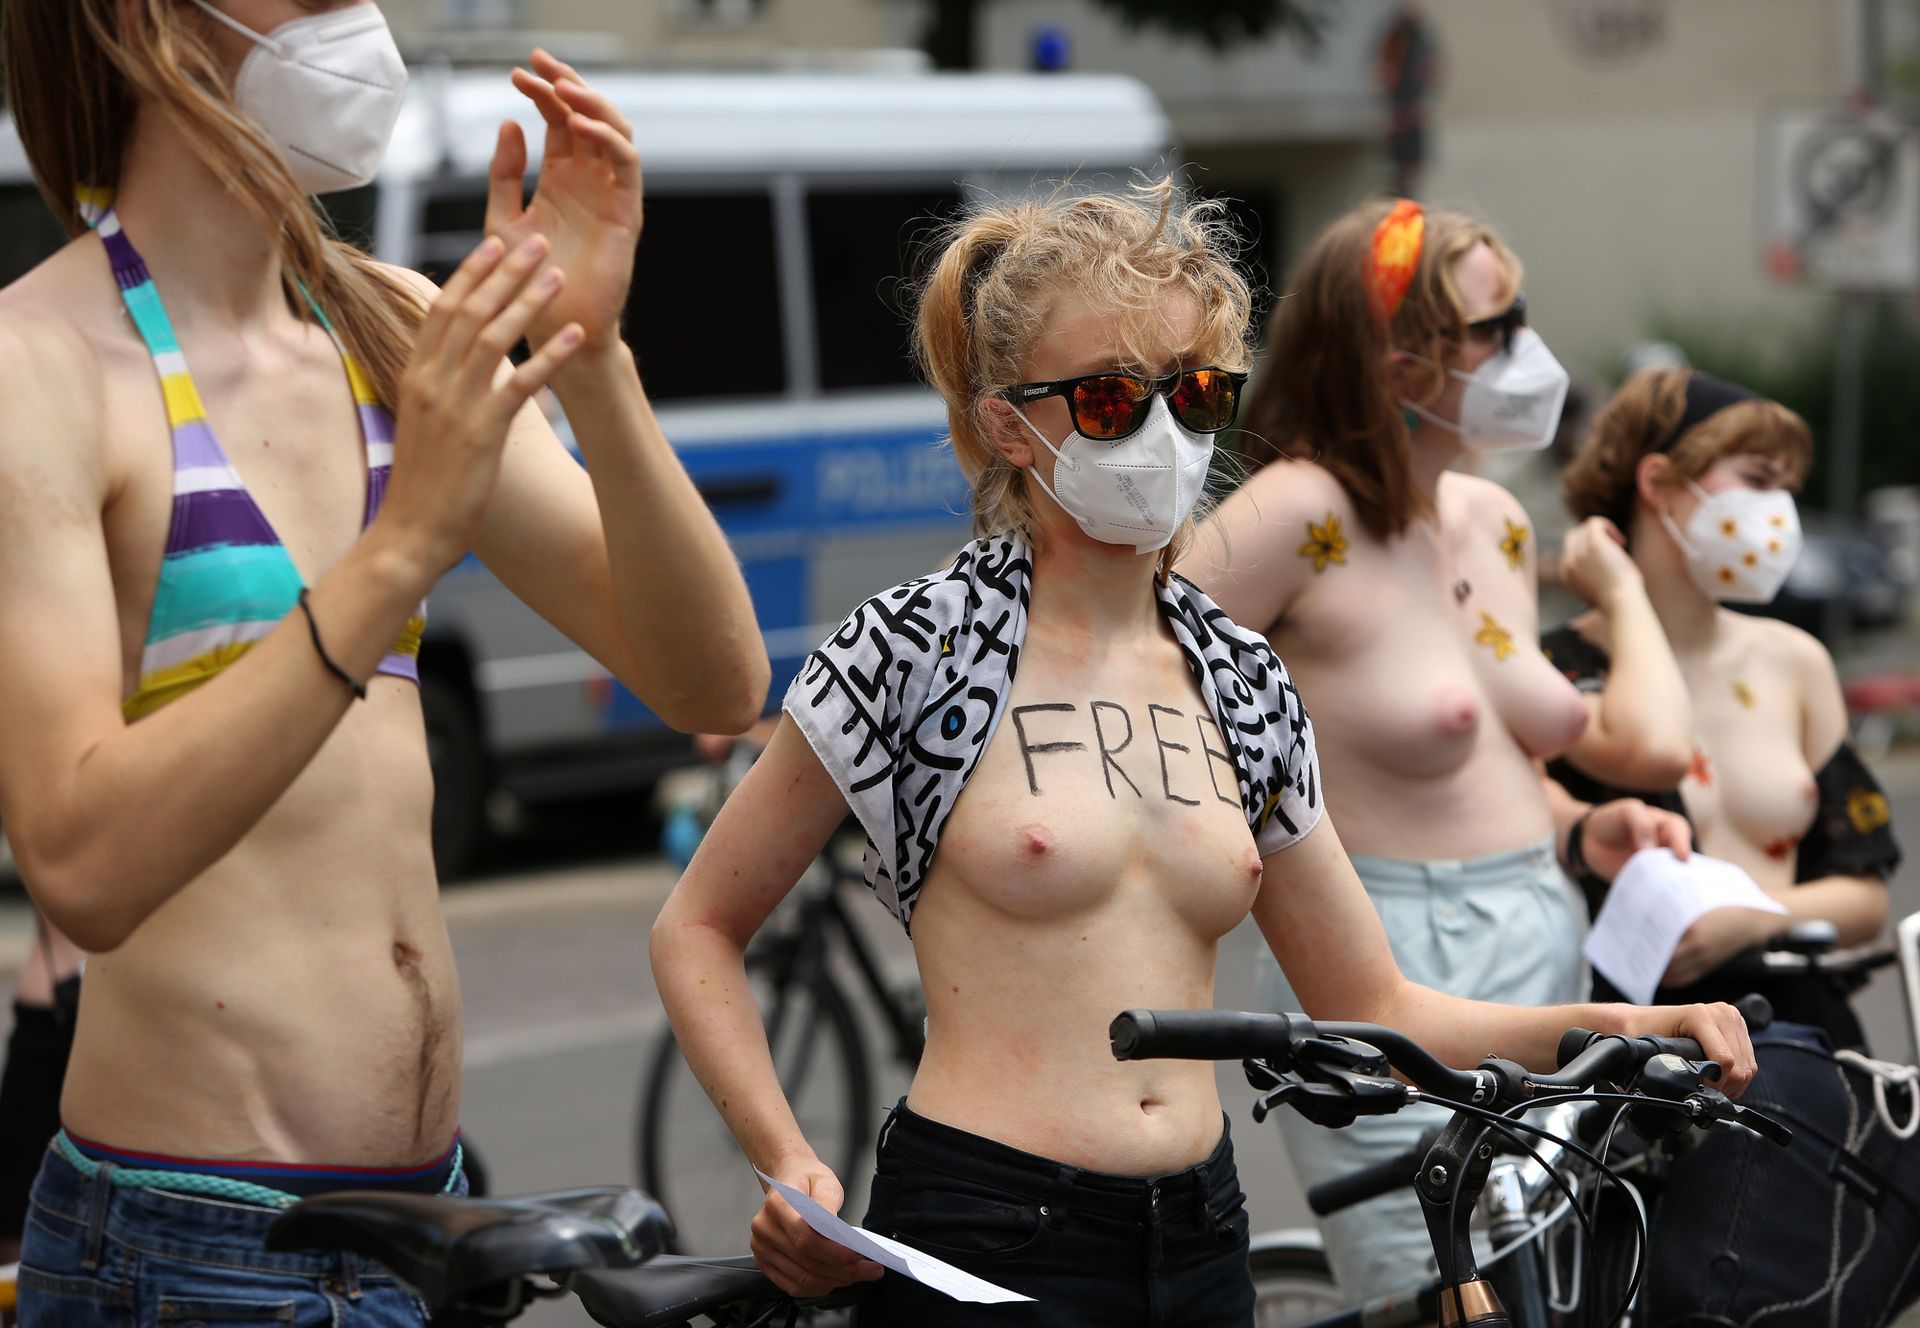 Topless-Protest-The-Fappening-Blog-20.jpg